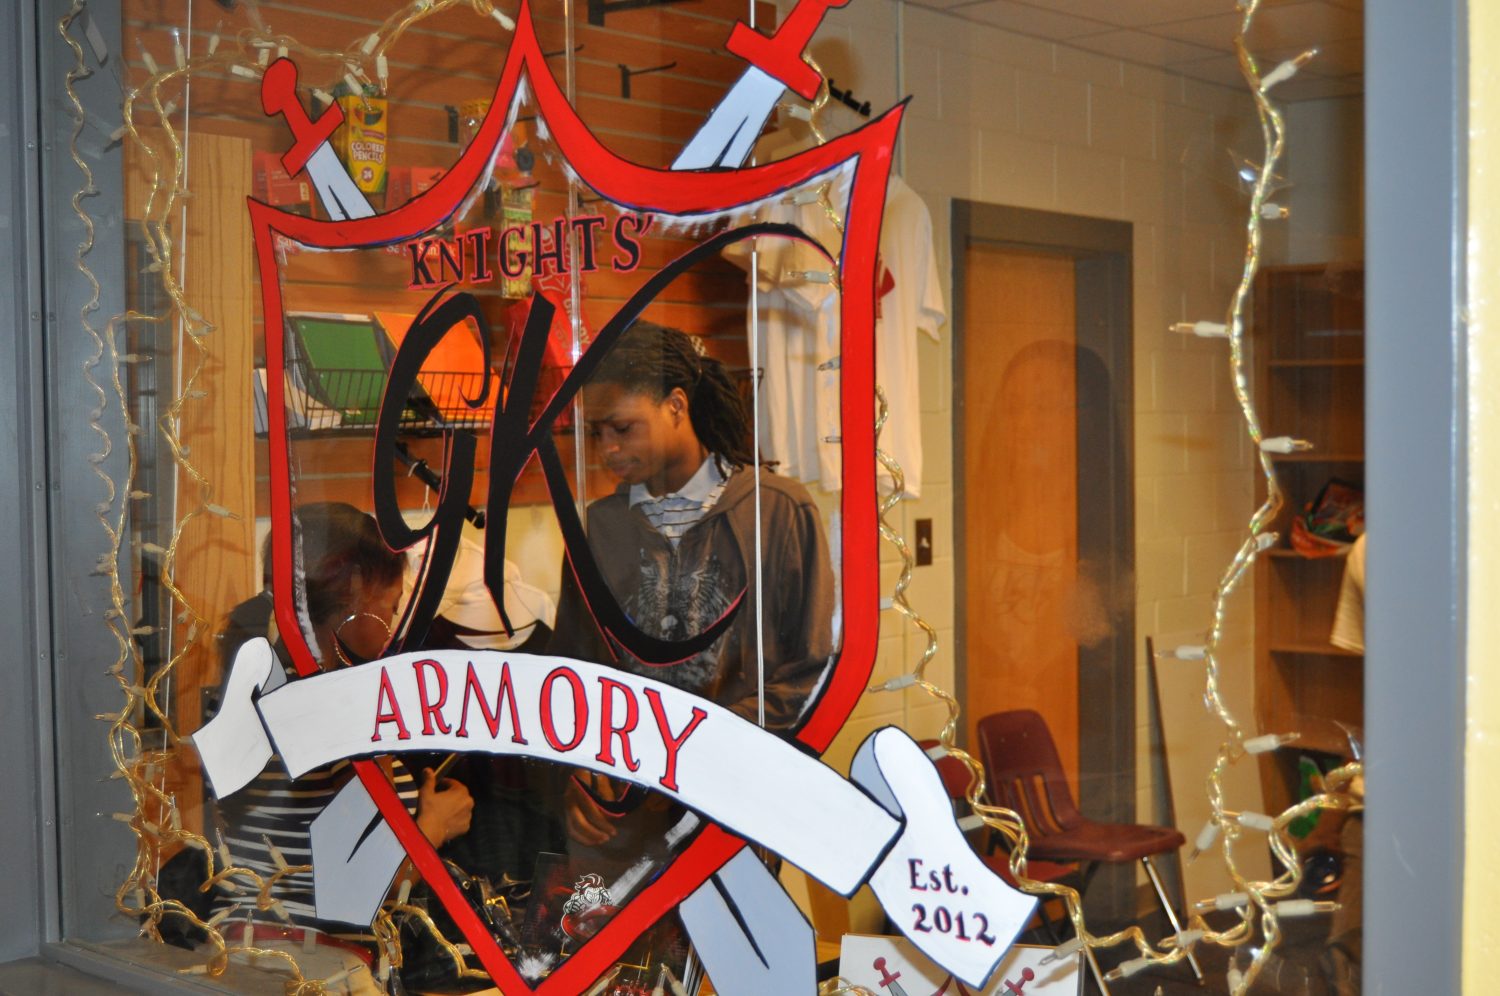 The+Grady+Armory%2C+opened+on+January+13%2C+sells+school+supplies%2C+clothes+and+snacks+before+and+after+school.